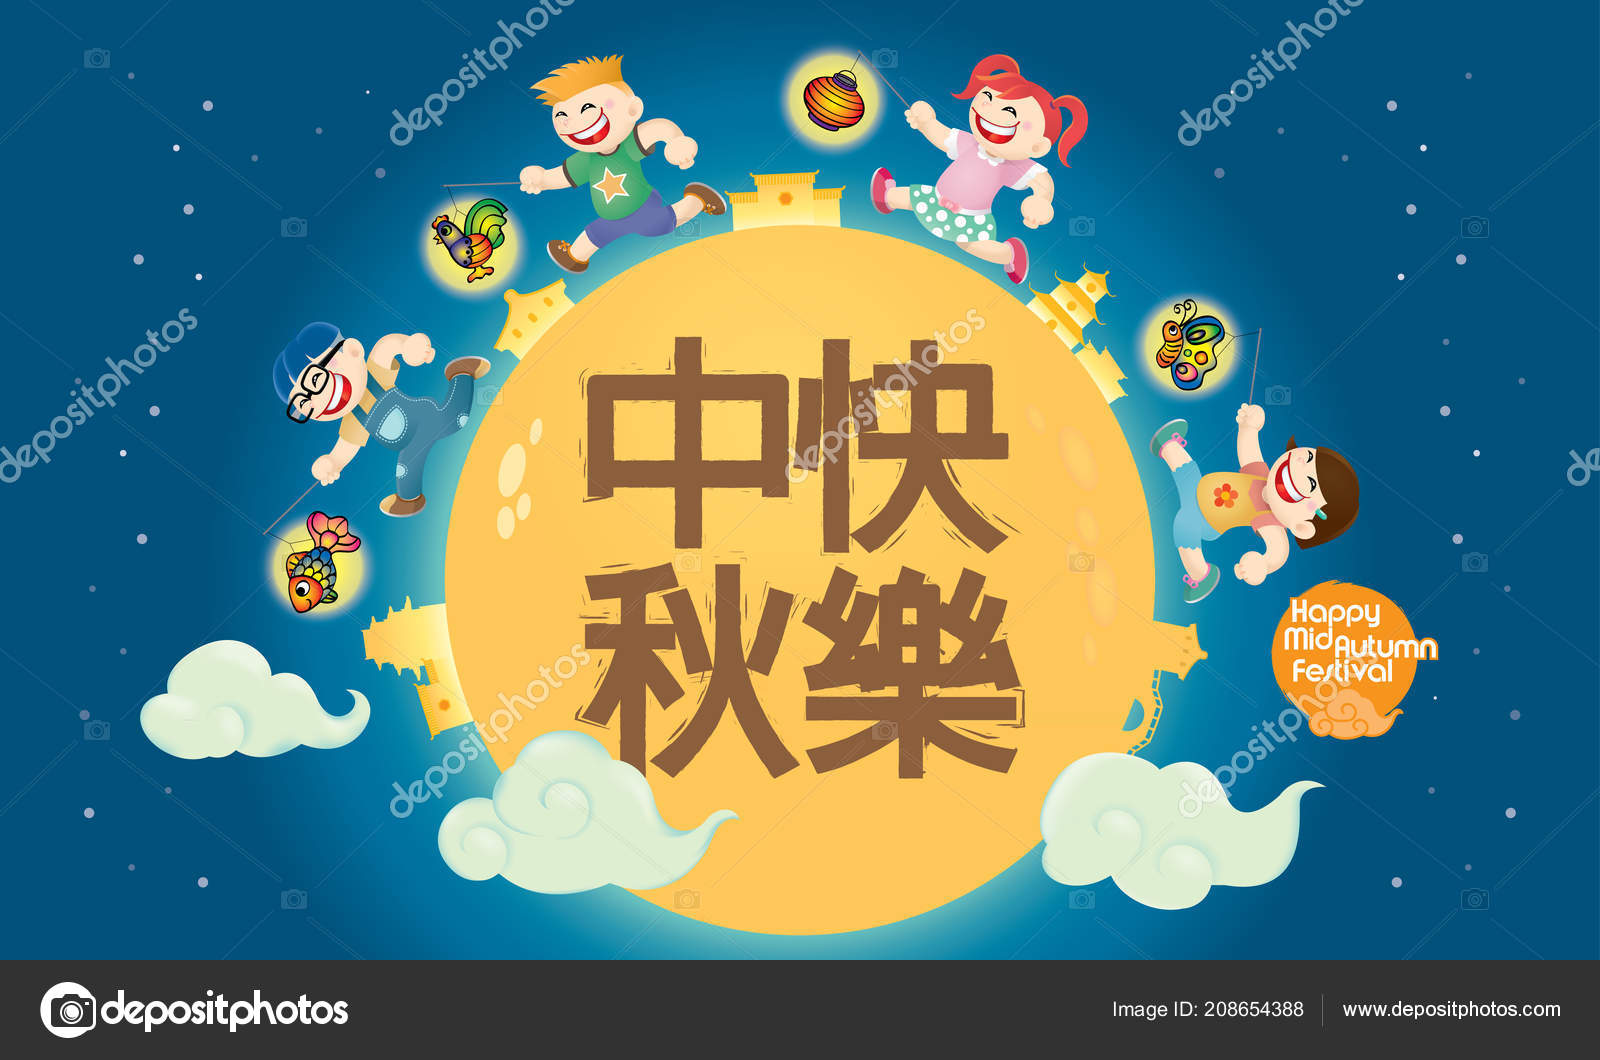 Chinese Mid Autumn Festival Design Modern Costume Kids Playing Lanterns Stock Vector C Aunkeong80 208654388